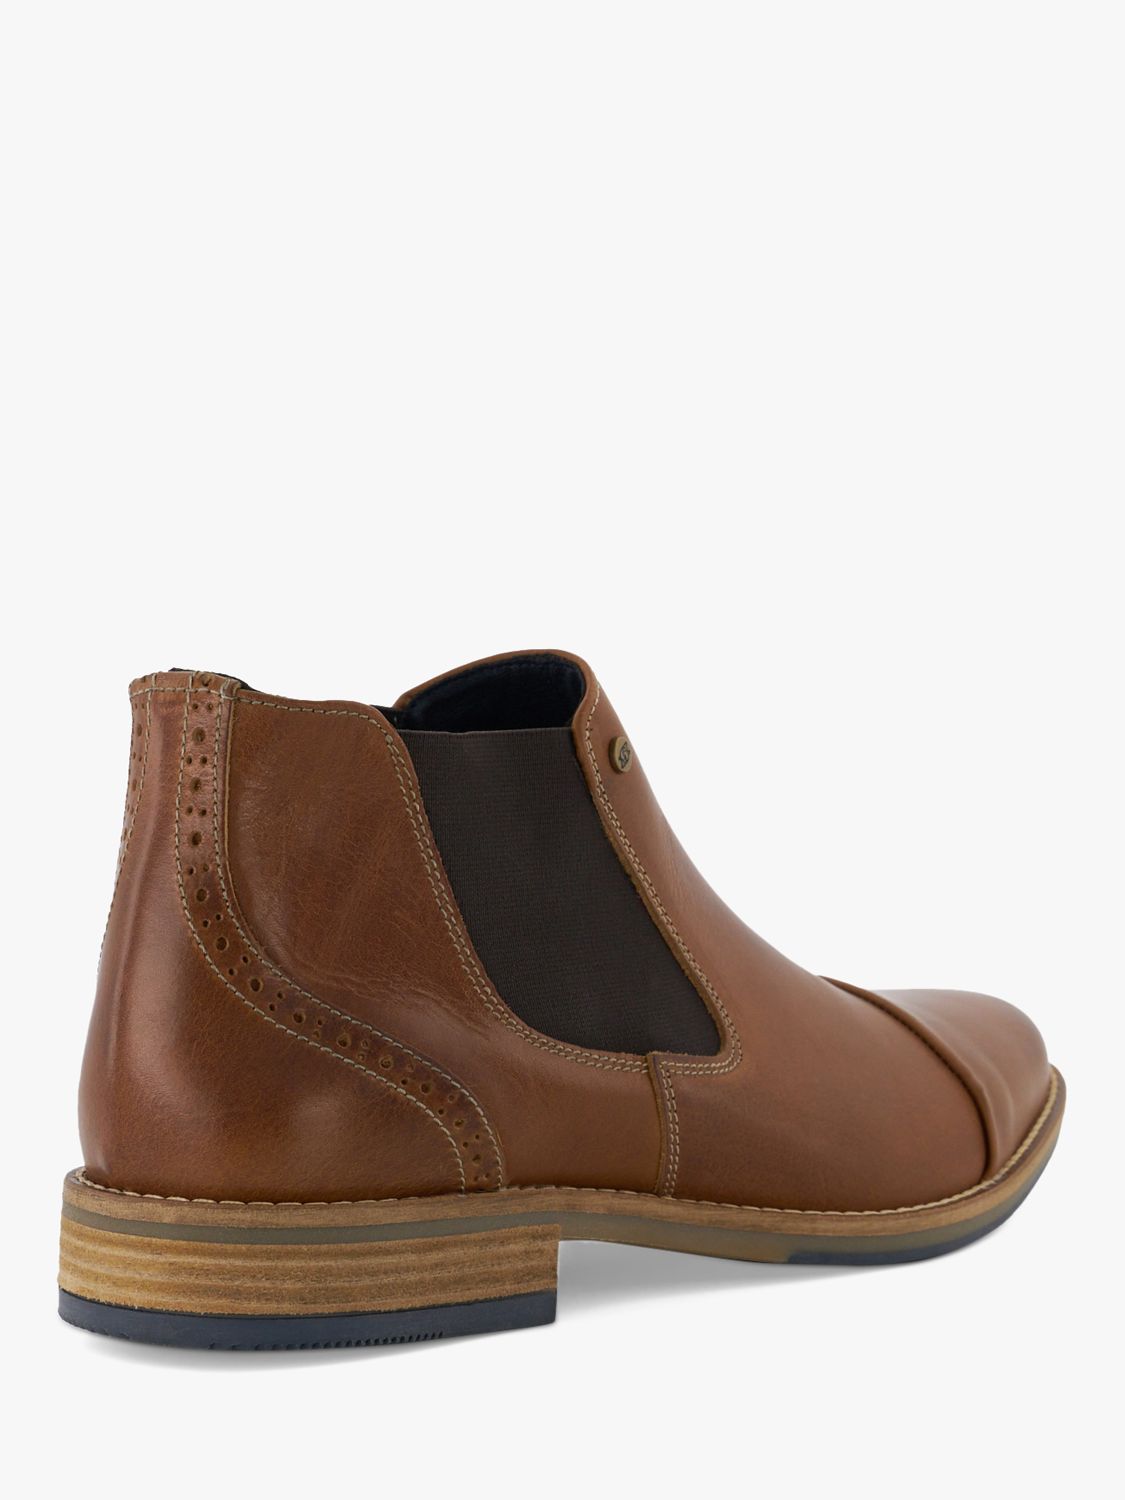 Dune Chilean Wide Fit Leather Chelsea Boots, Tan at John Lewis & Partners